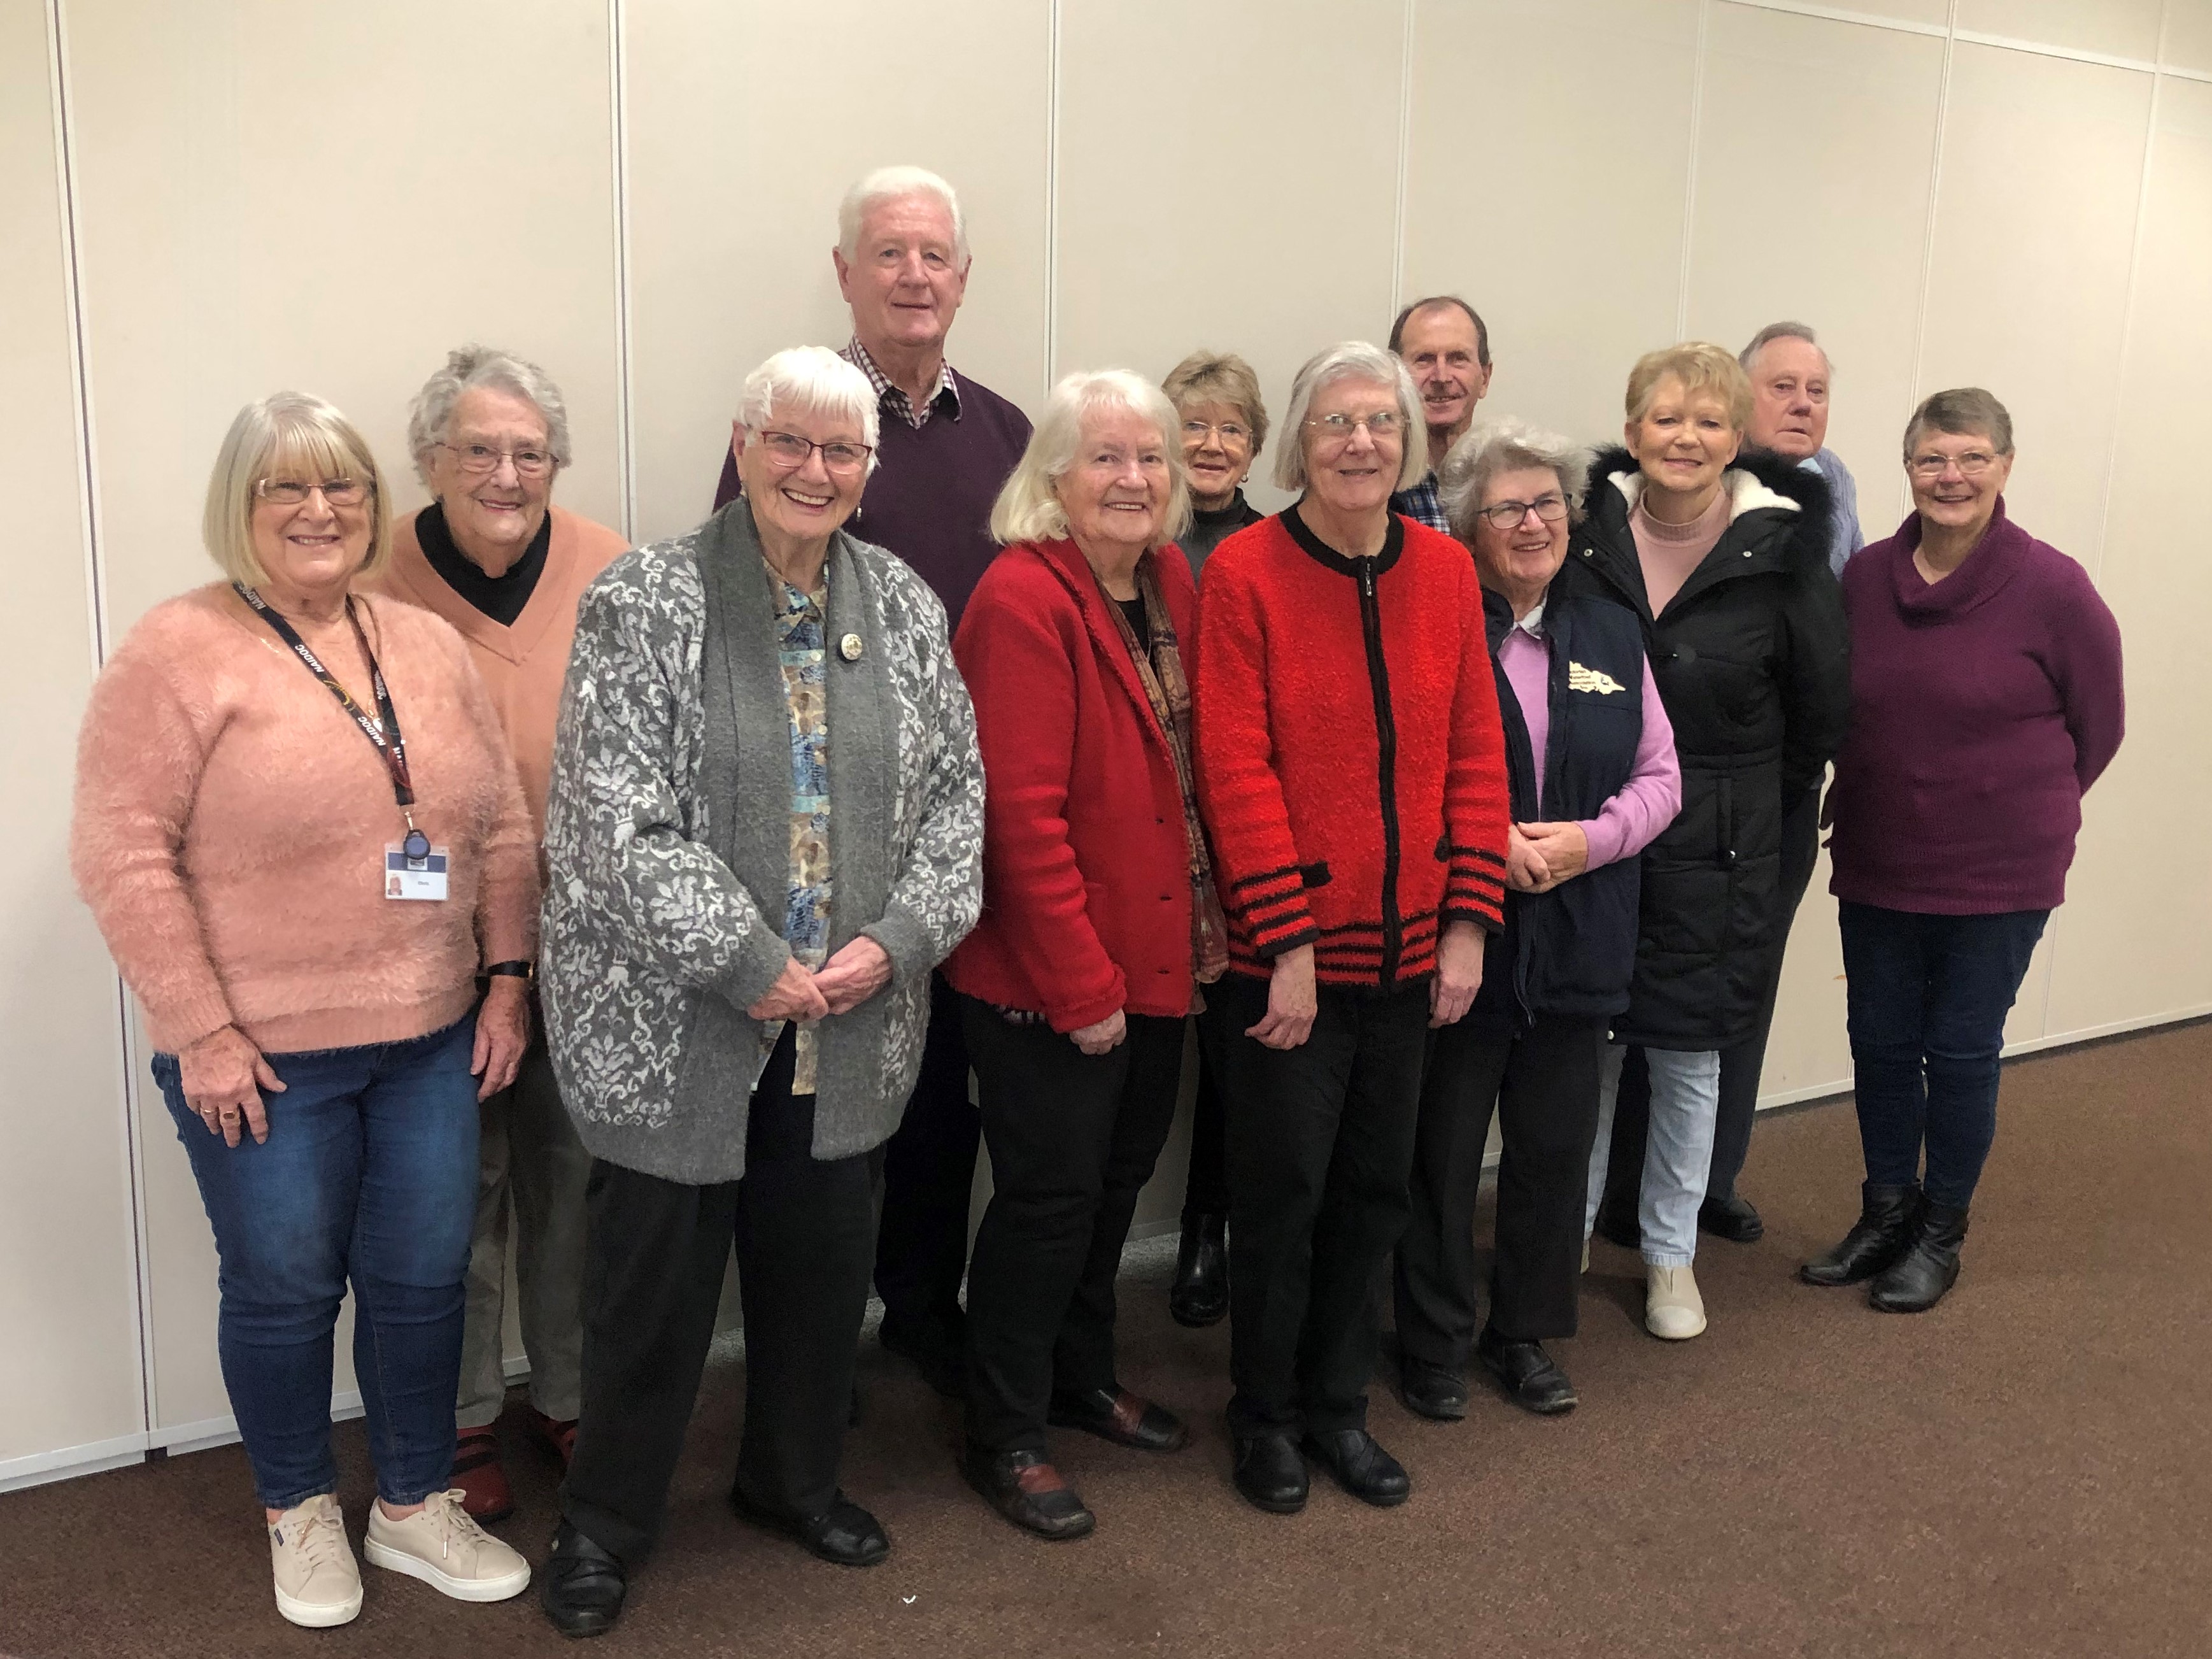 Members of the Benalla Age Friendly Reference Group